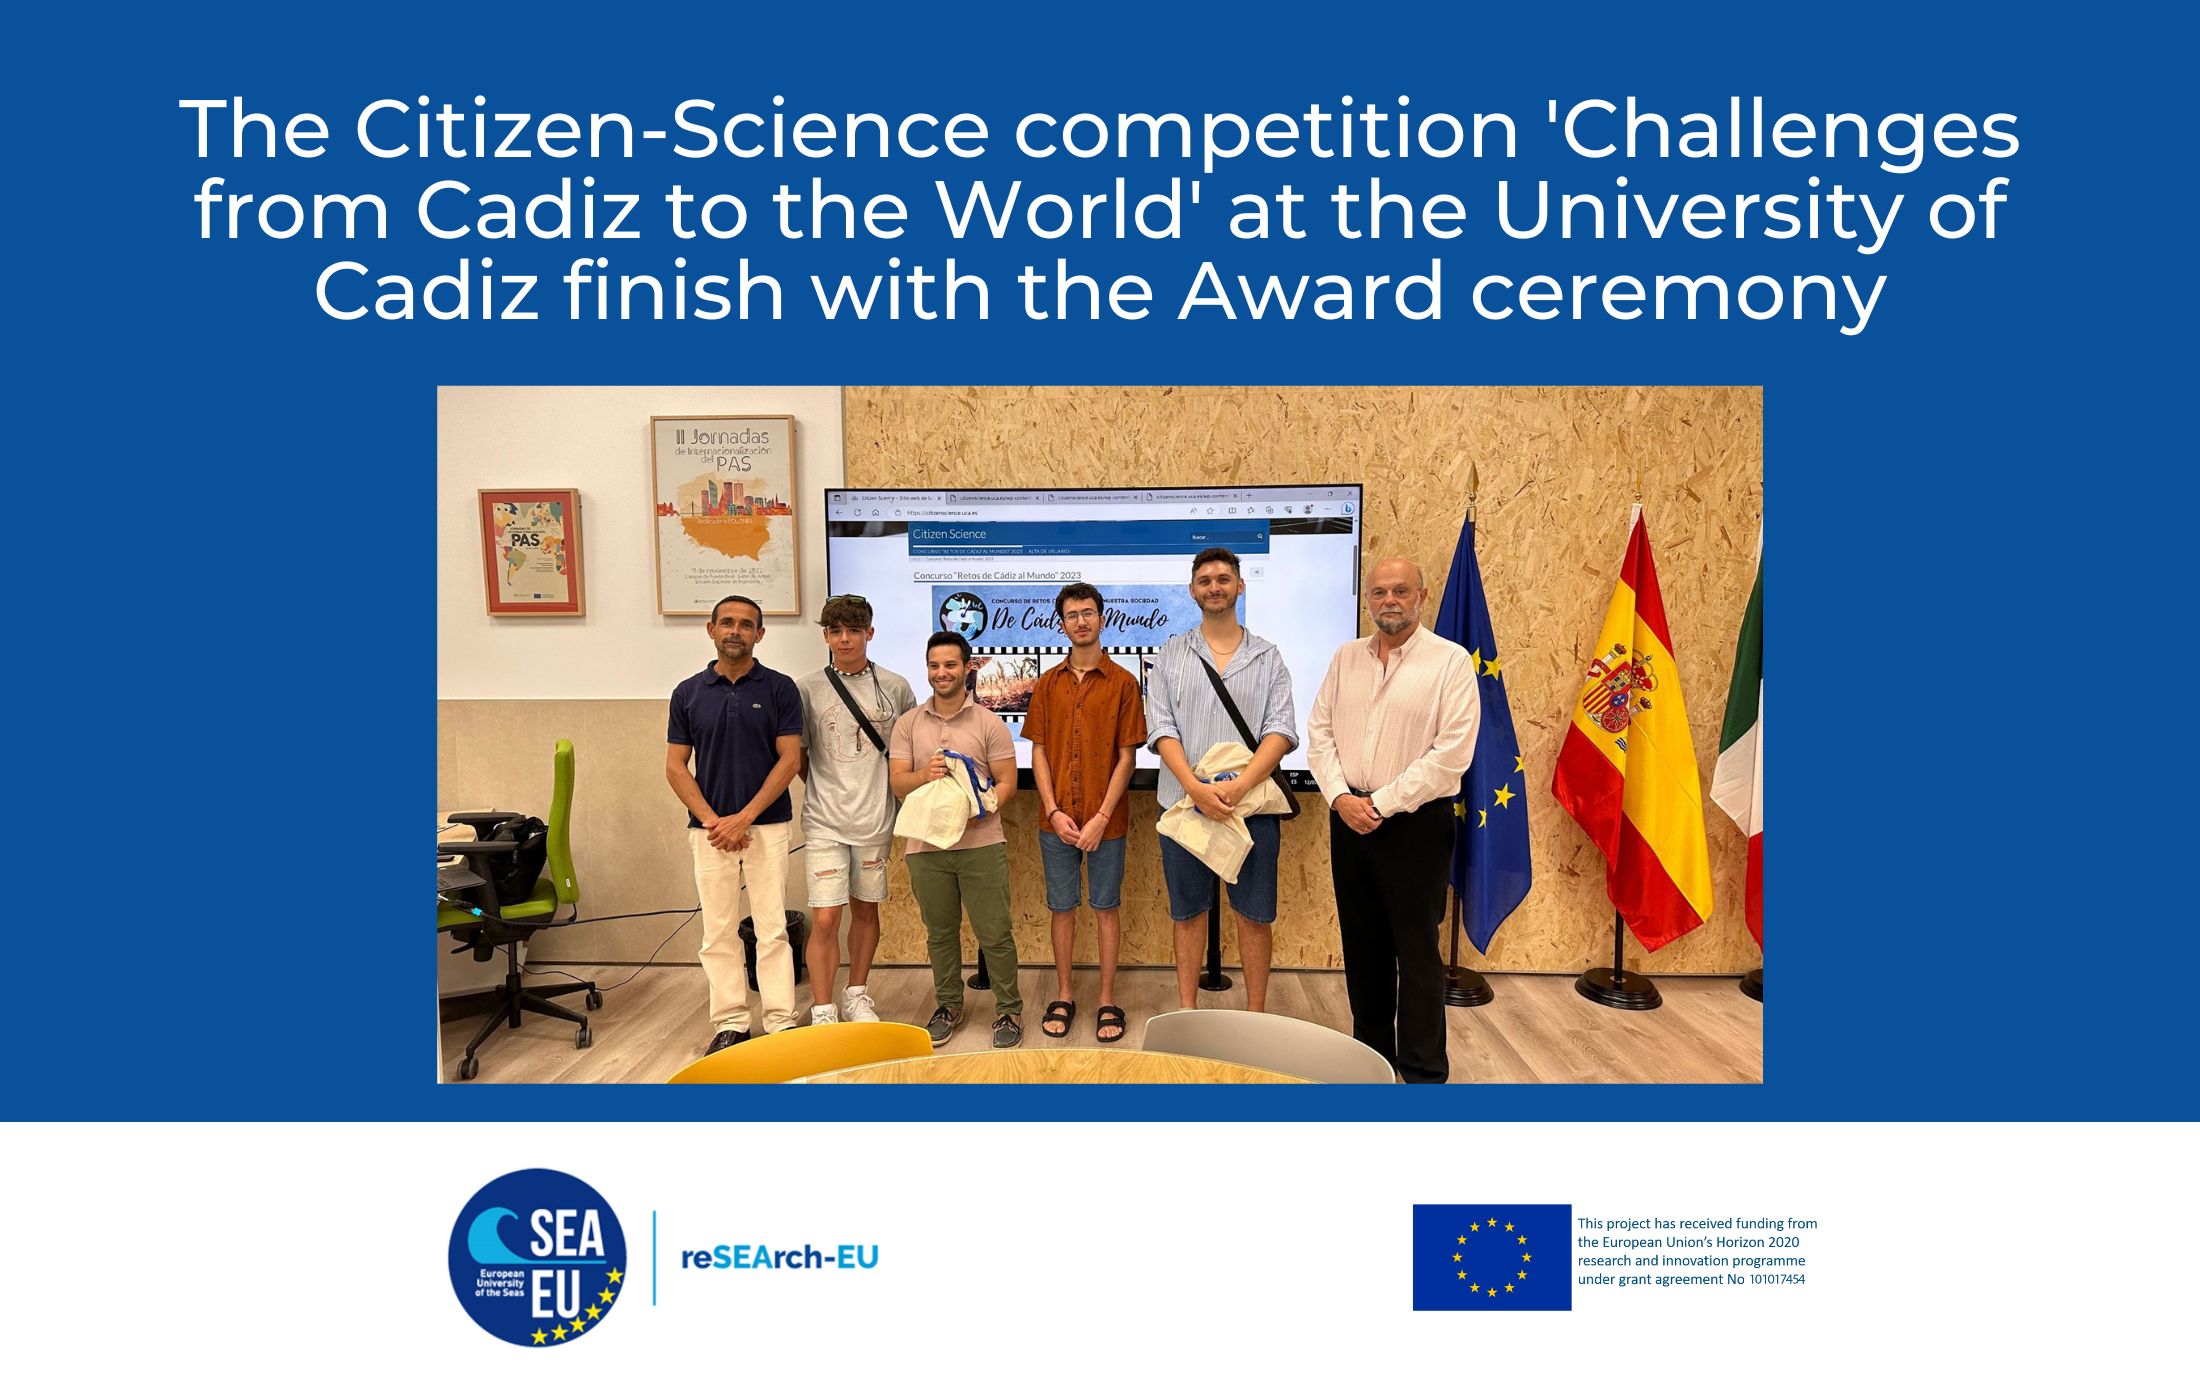 The Citizen-Science competition 'Challenges from Cadiz to the World' at the University of Cadiz finish with the Award ceremony